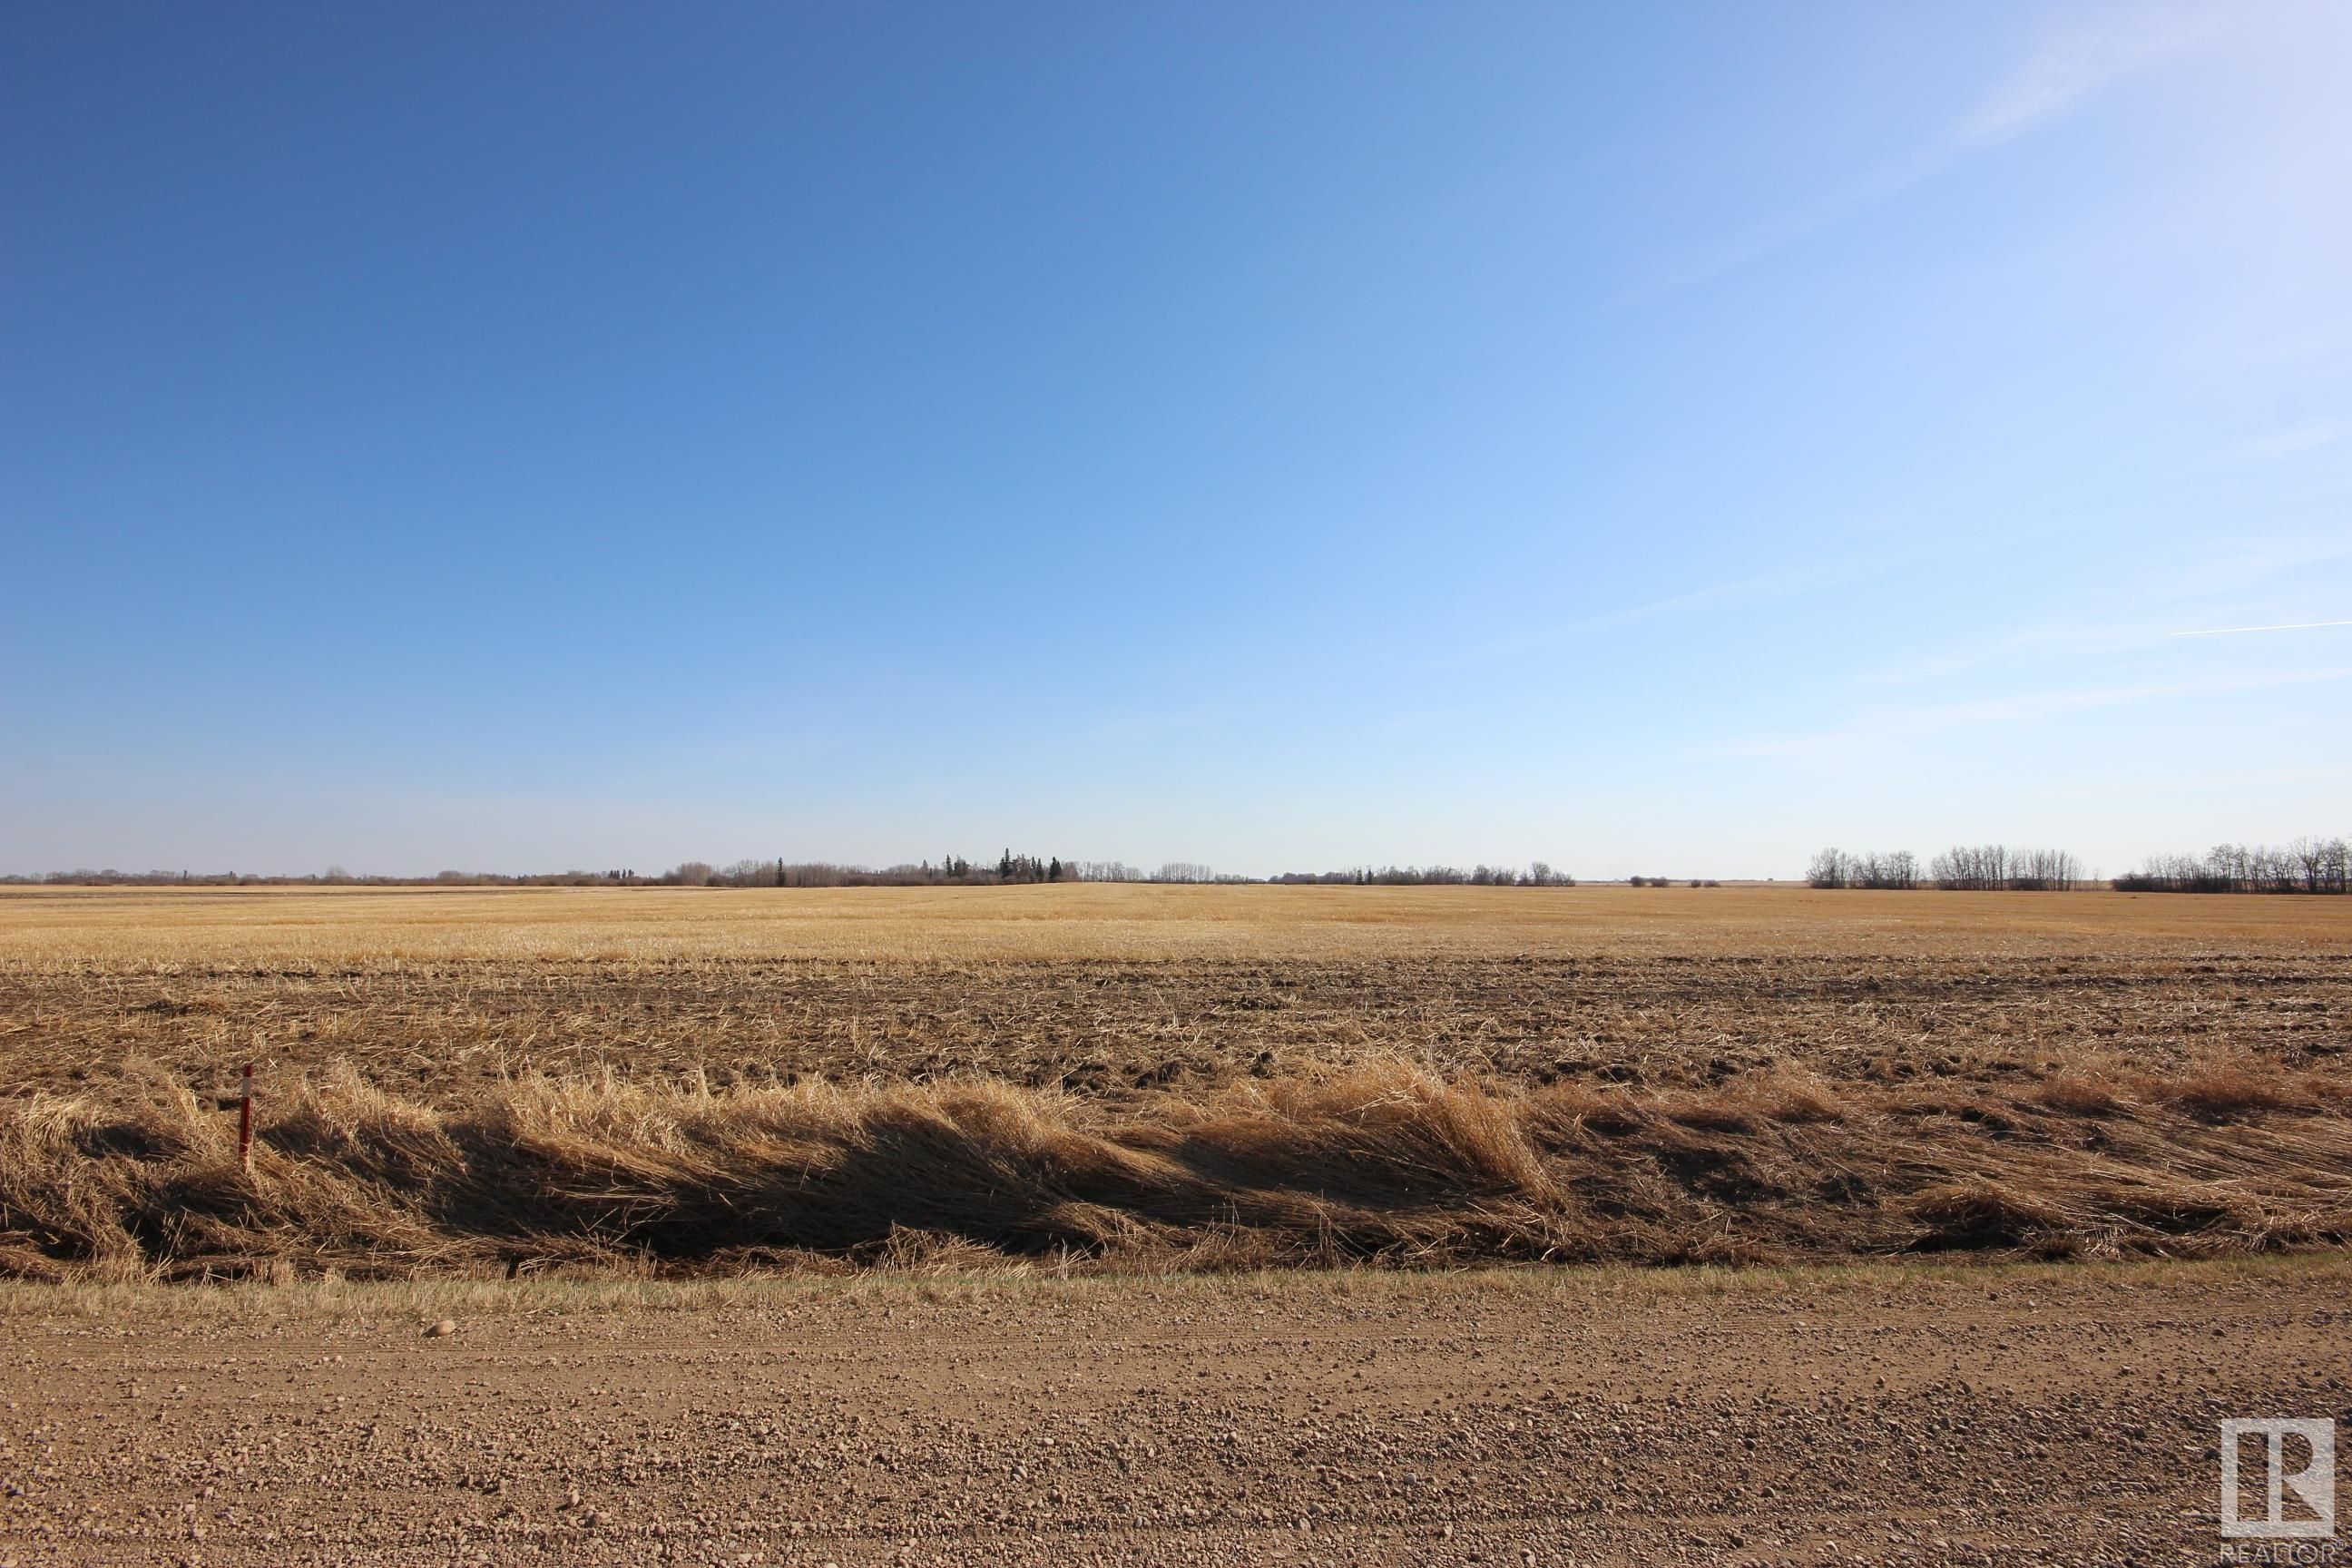 Main Photo: Lot 1 TWP 564 RR 250: Rural Sturgeon County Rural Land/Vacant Lot for sale : MLS®# E4265820